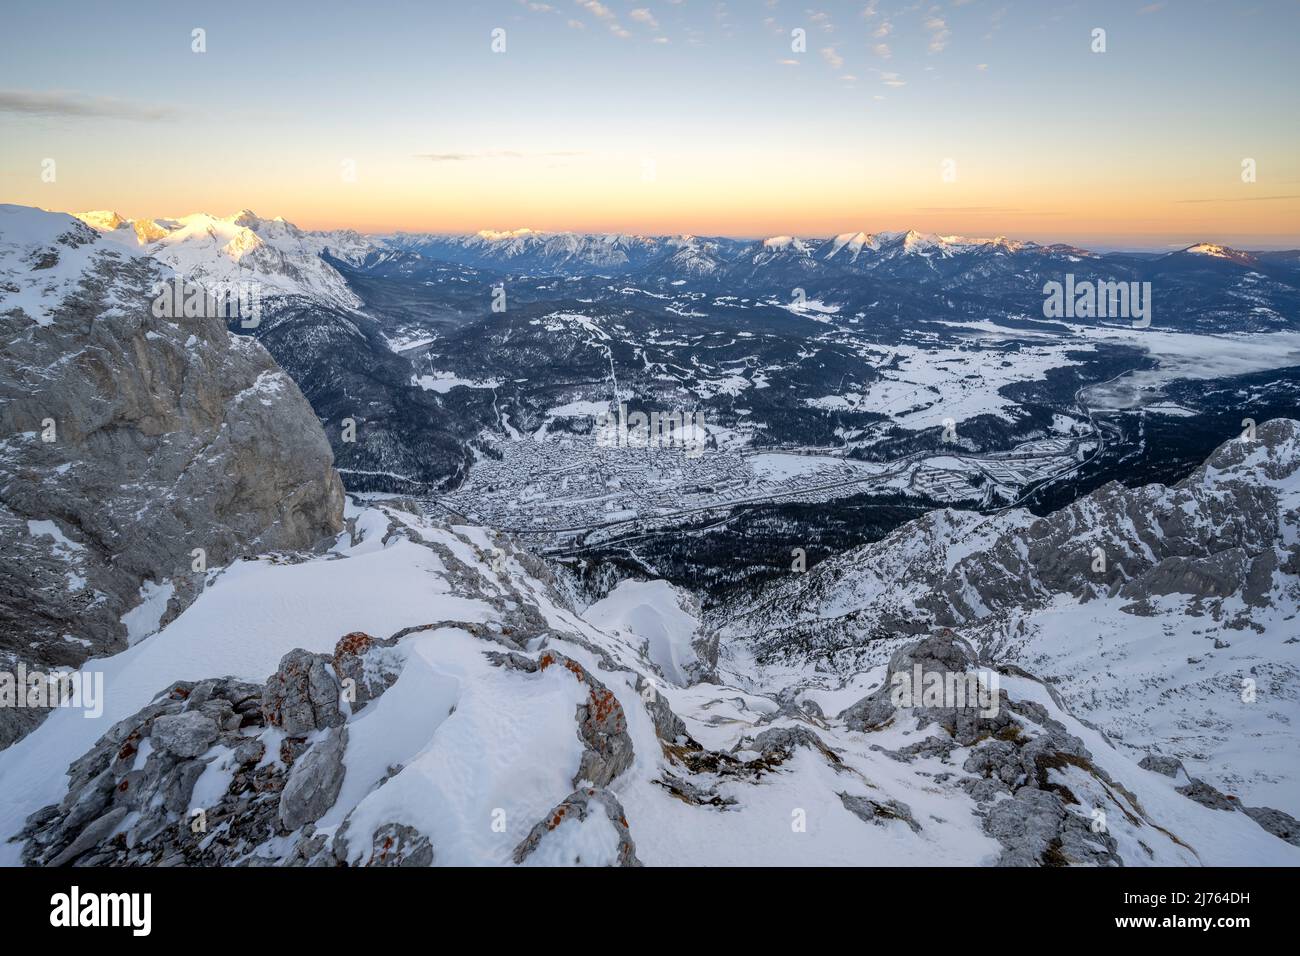 View from the western Karwendel, over rocks and snow ind he Werdenfelser Land in winter, with the market town Mittenwald, the Kranzberg, the Bavarian Prealps and towards Garmisch-Partenkirchen, with the Zugspitze in the background, while soft colors of dawn are in the sky. Stock Photo